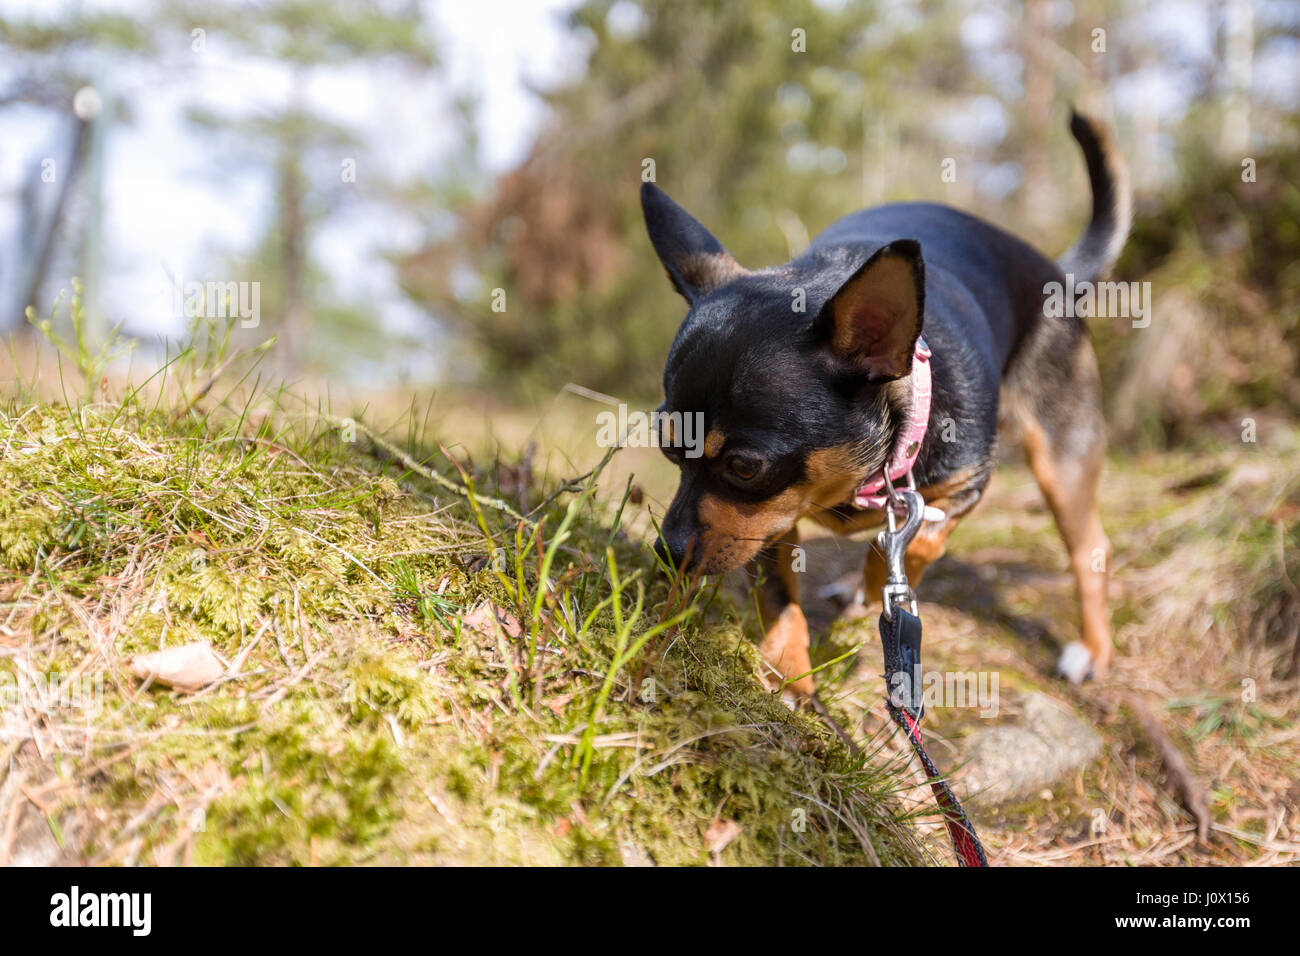 Small female Chihuahua dog using it's nose sniffing grass on the ground in woods for scents during walk outdoors  Model Release: No.  Property Release: Yes. Stock Photo